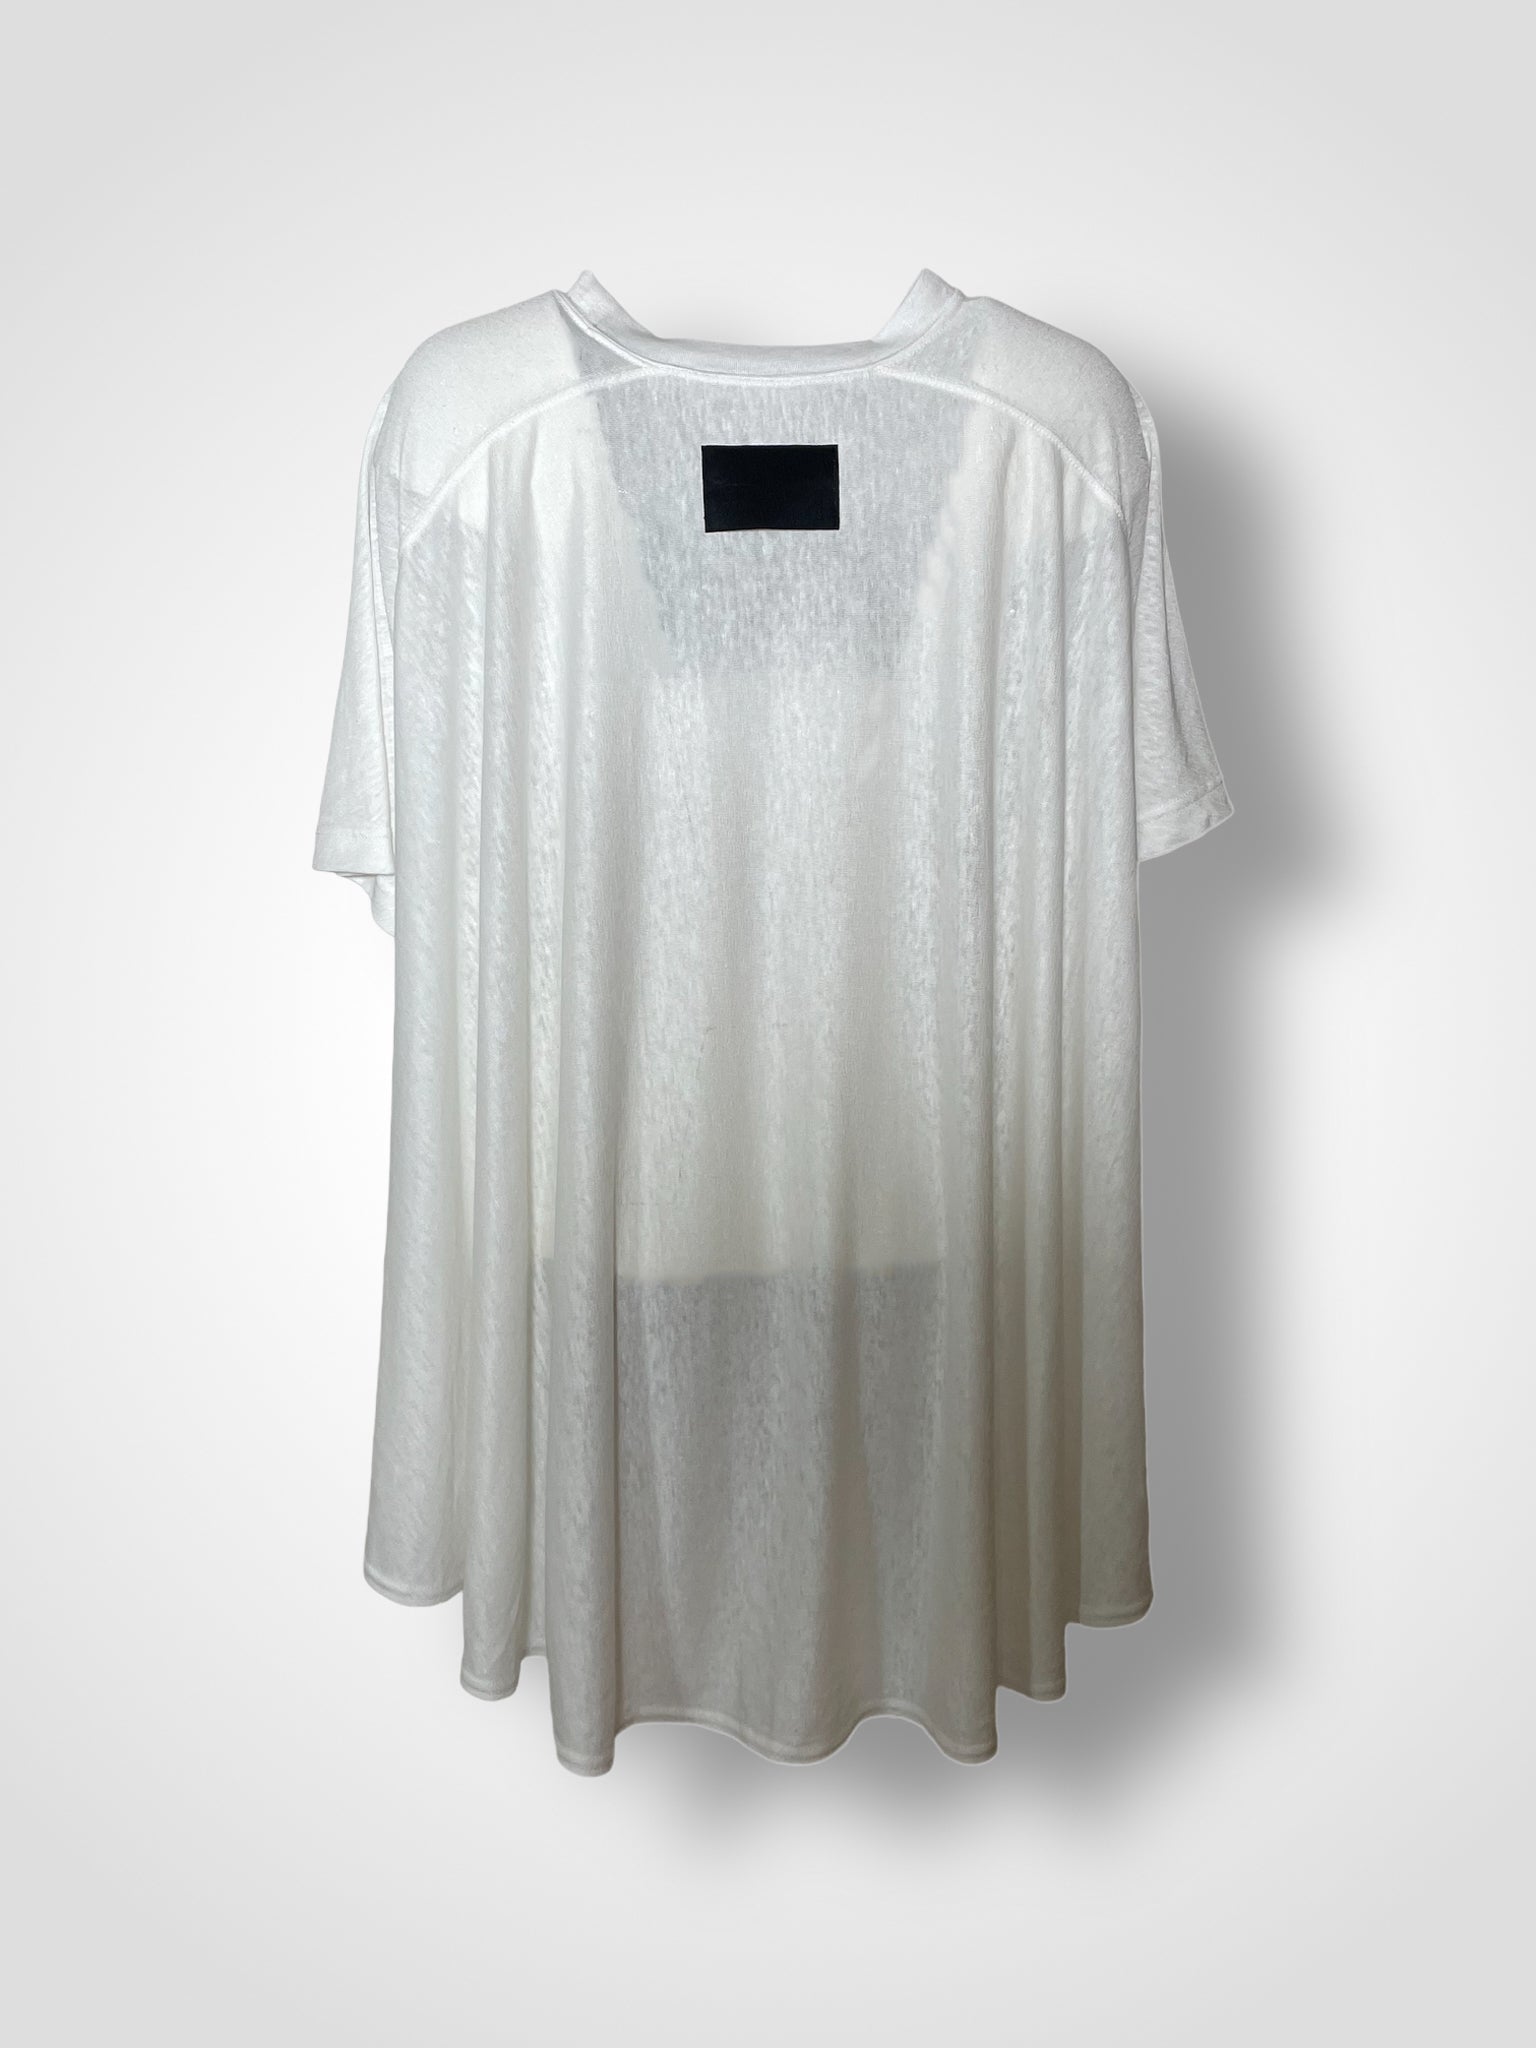 ABIGAIL TOP / IMPERIAL LINEN JERSEY - C8 – COGTHEBIGSMOKE